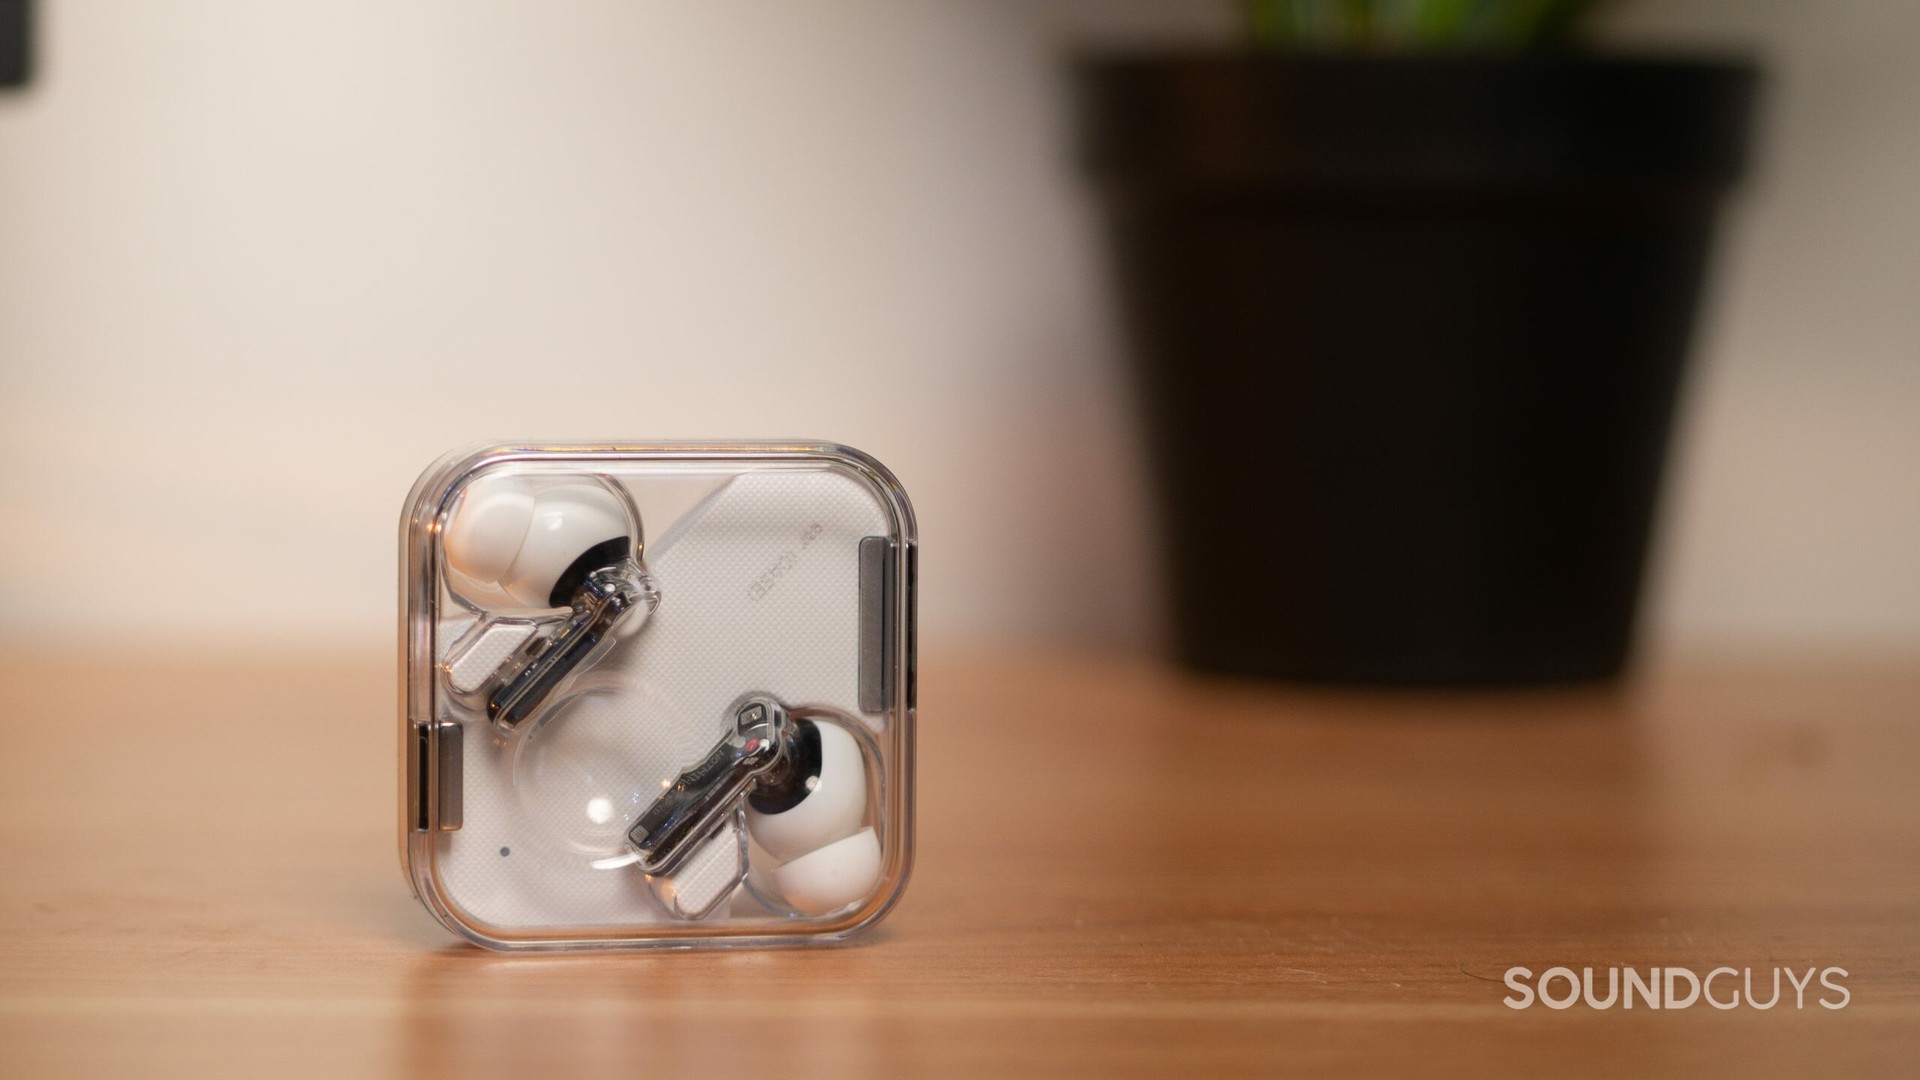 Nothing Ear 1 The true wireless earbuds are placed in a transparent shell because it stands upright on a wooden surface.